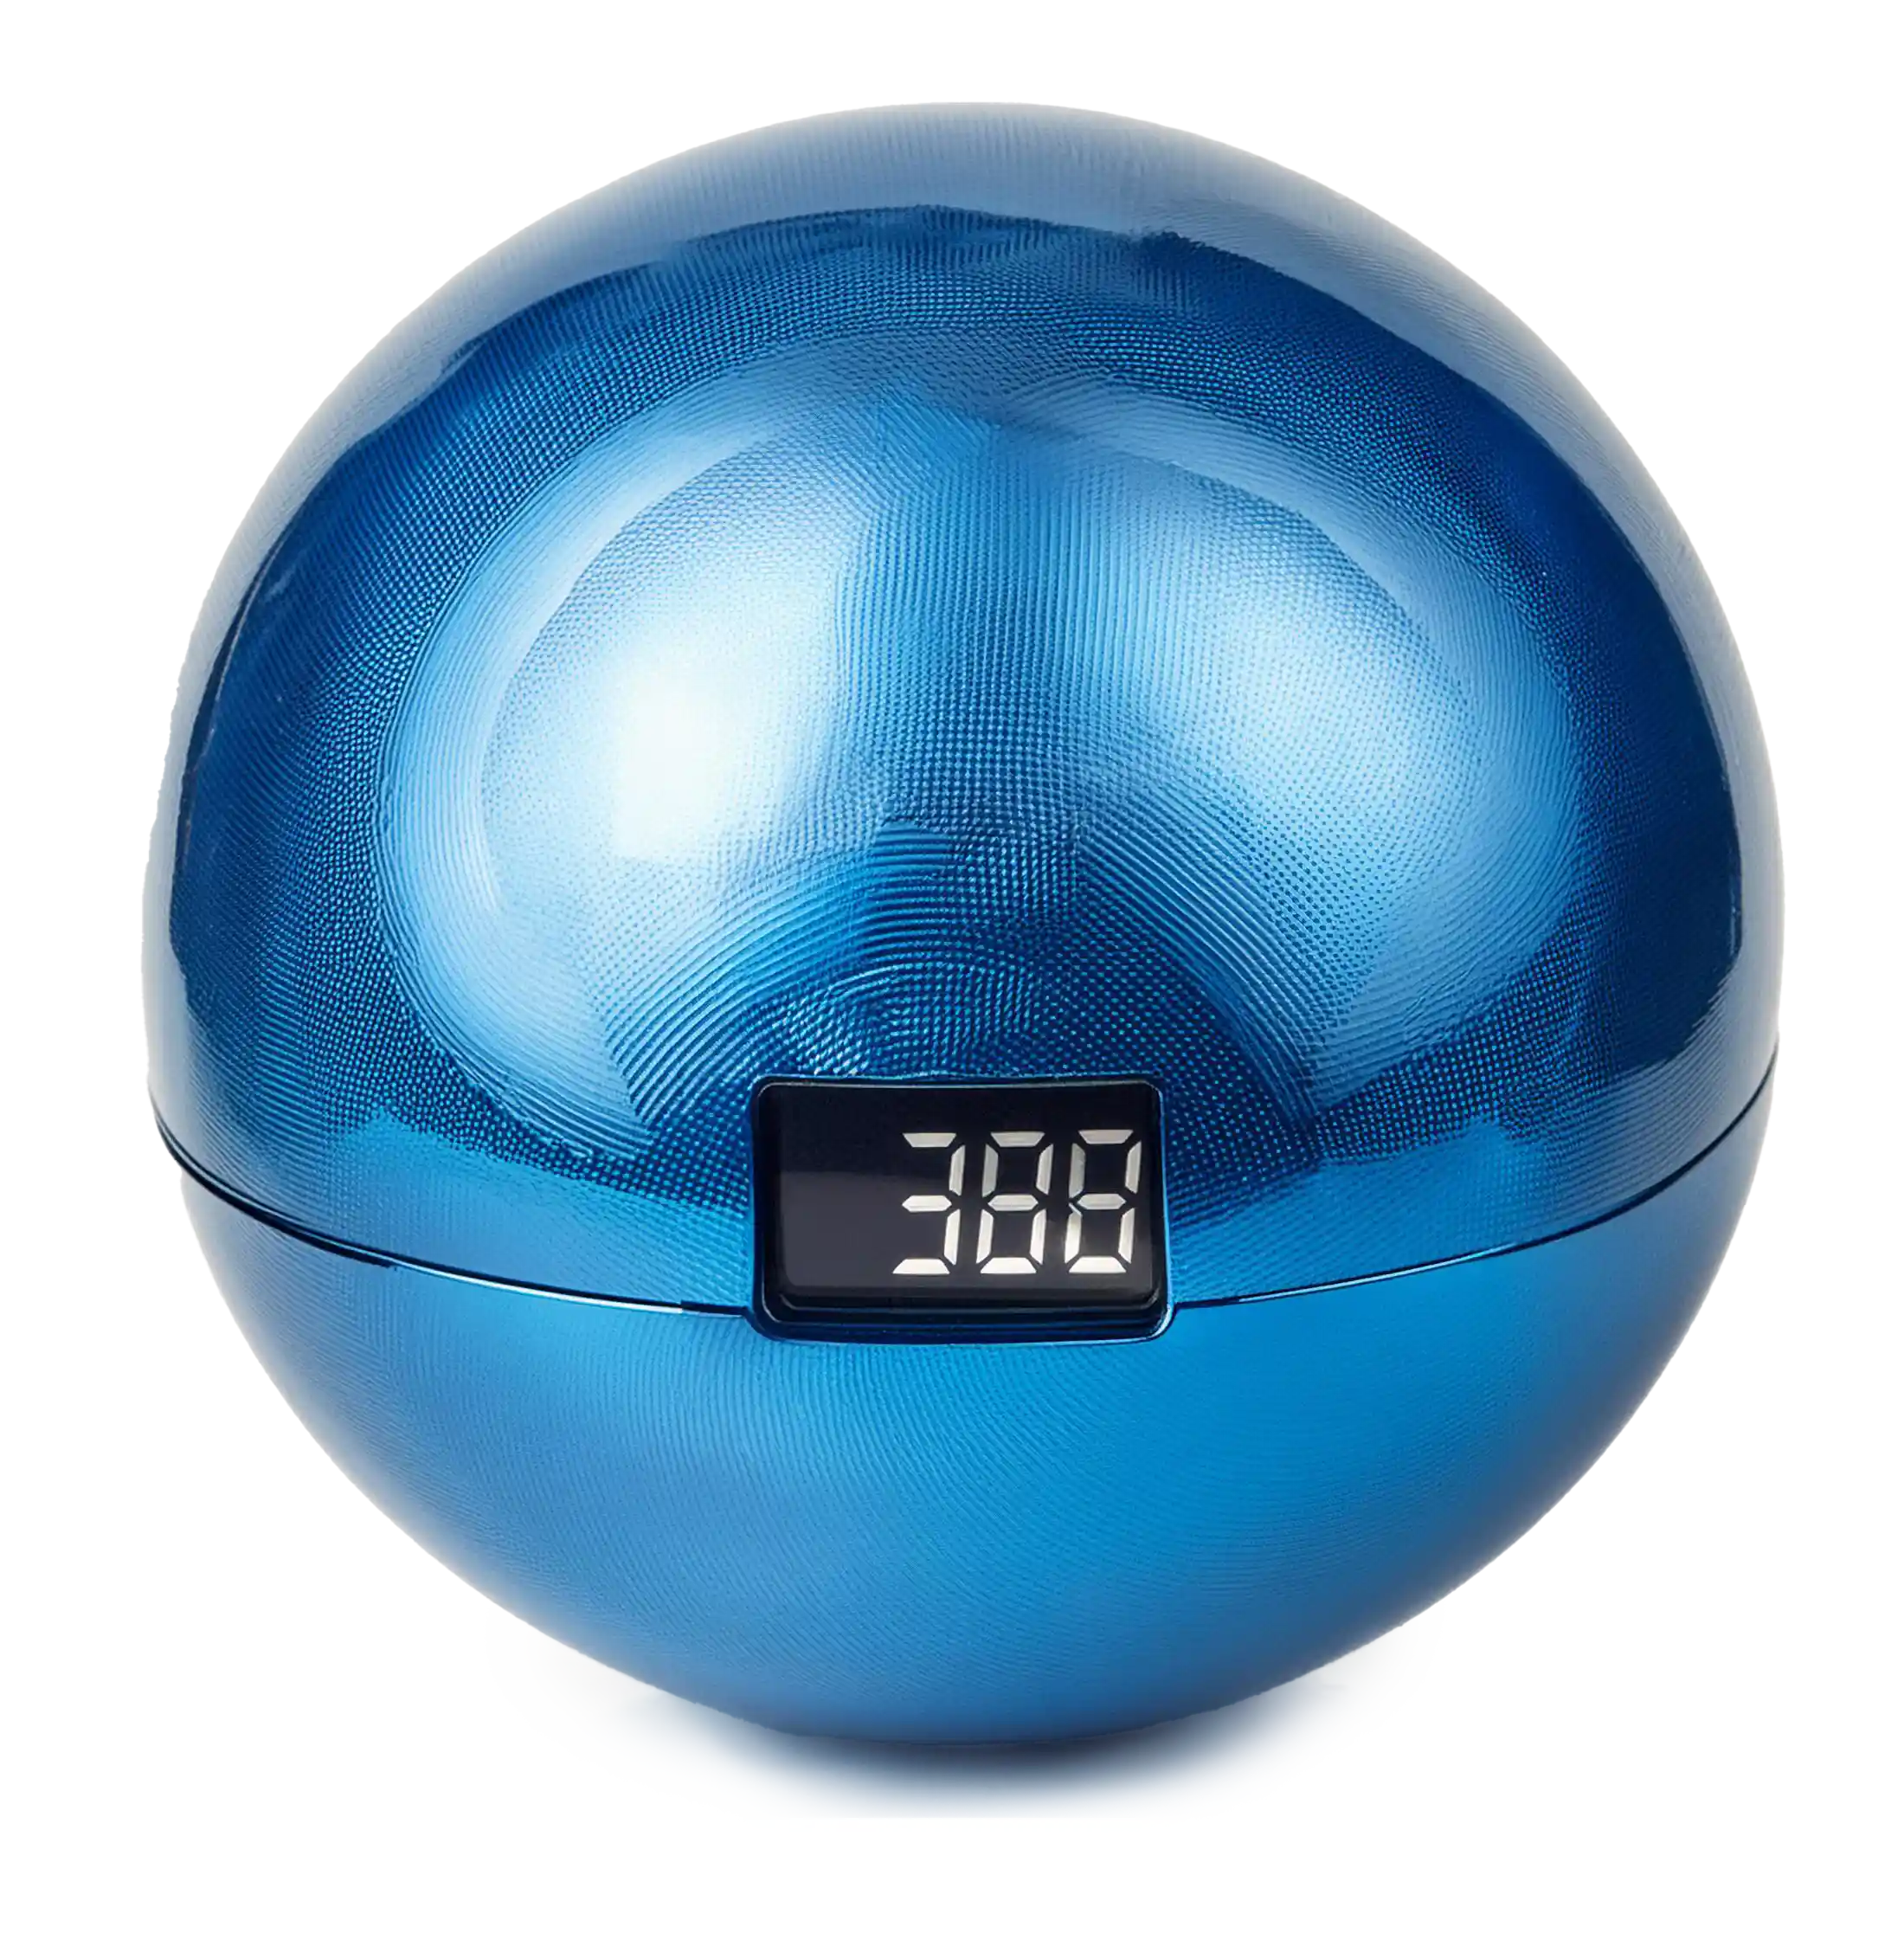 A blue digital clock in the shape of a sphere